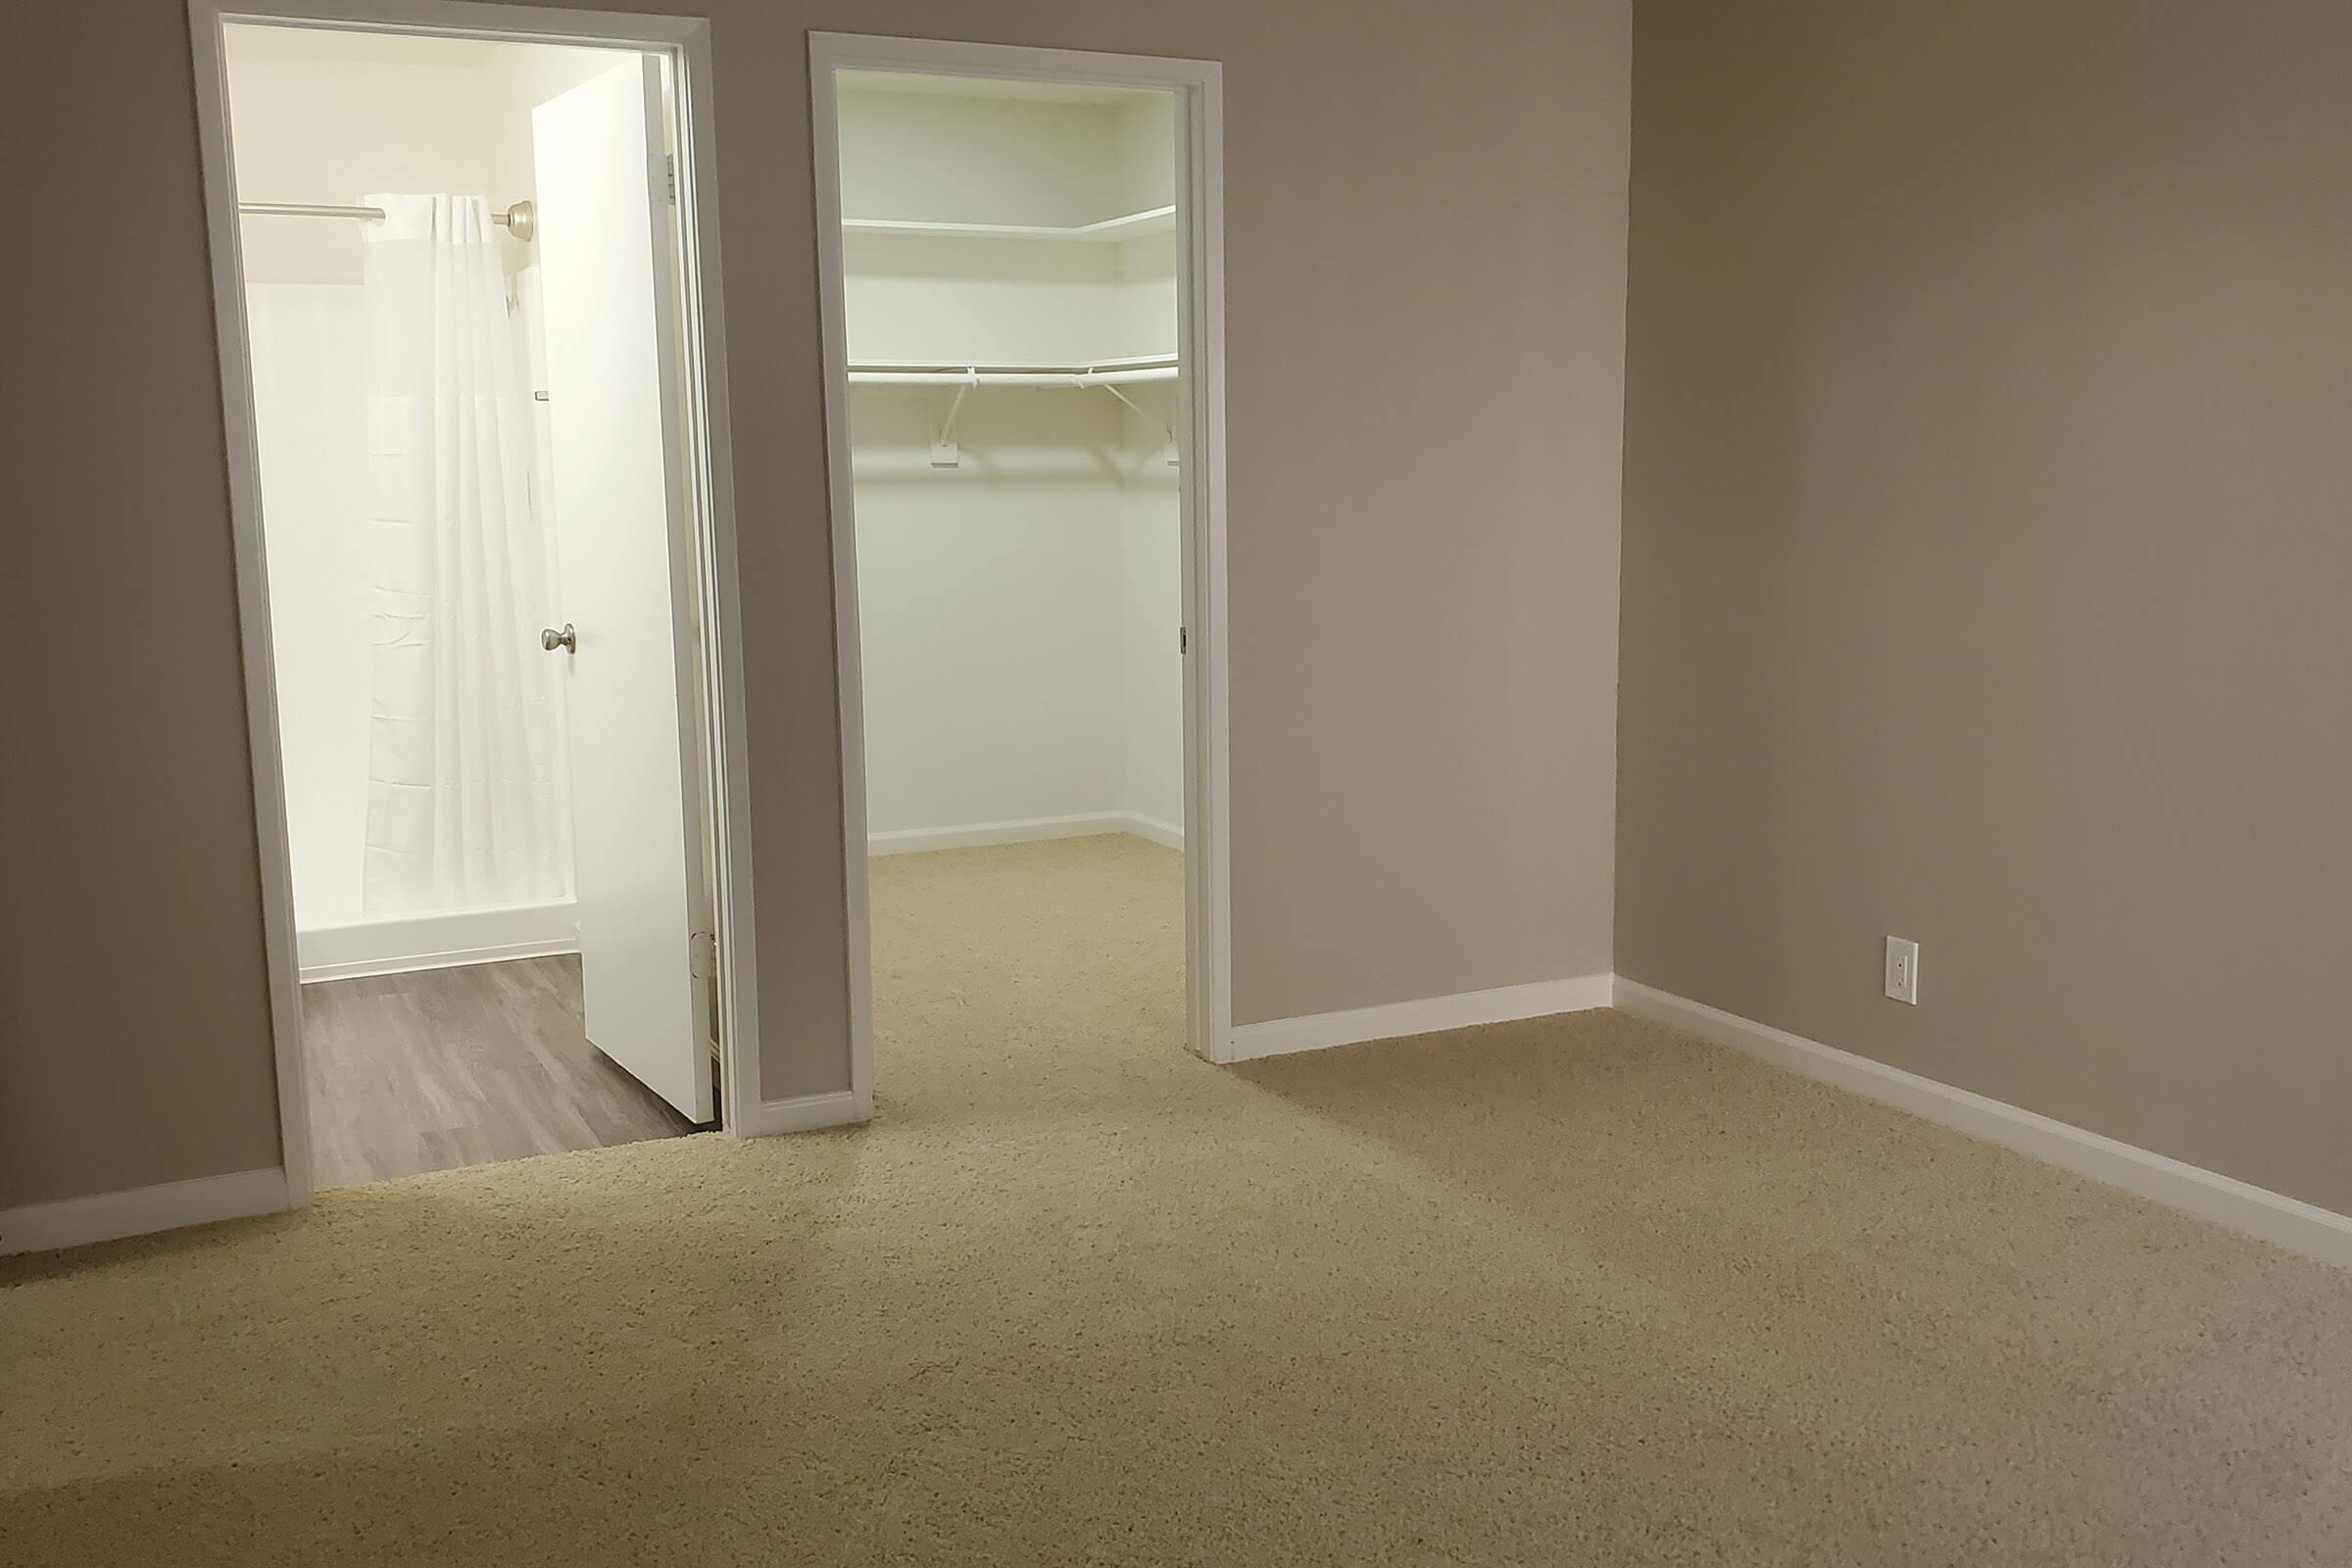 bedroom with a walk-in closet and bathroom